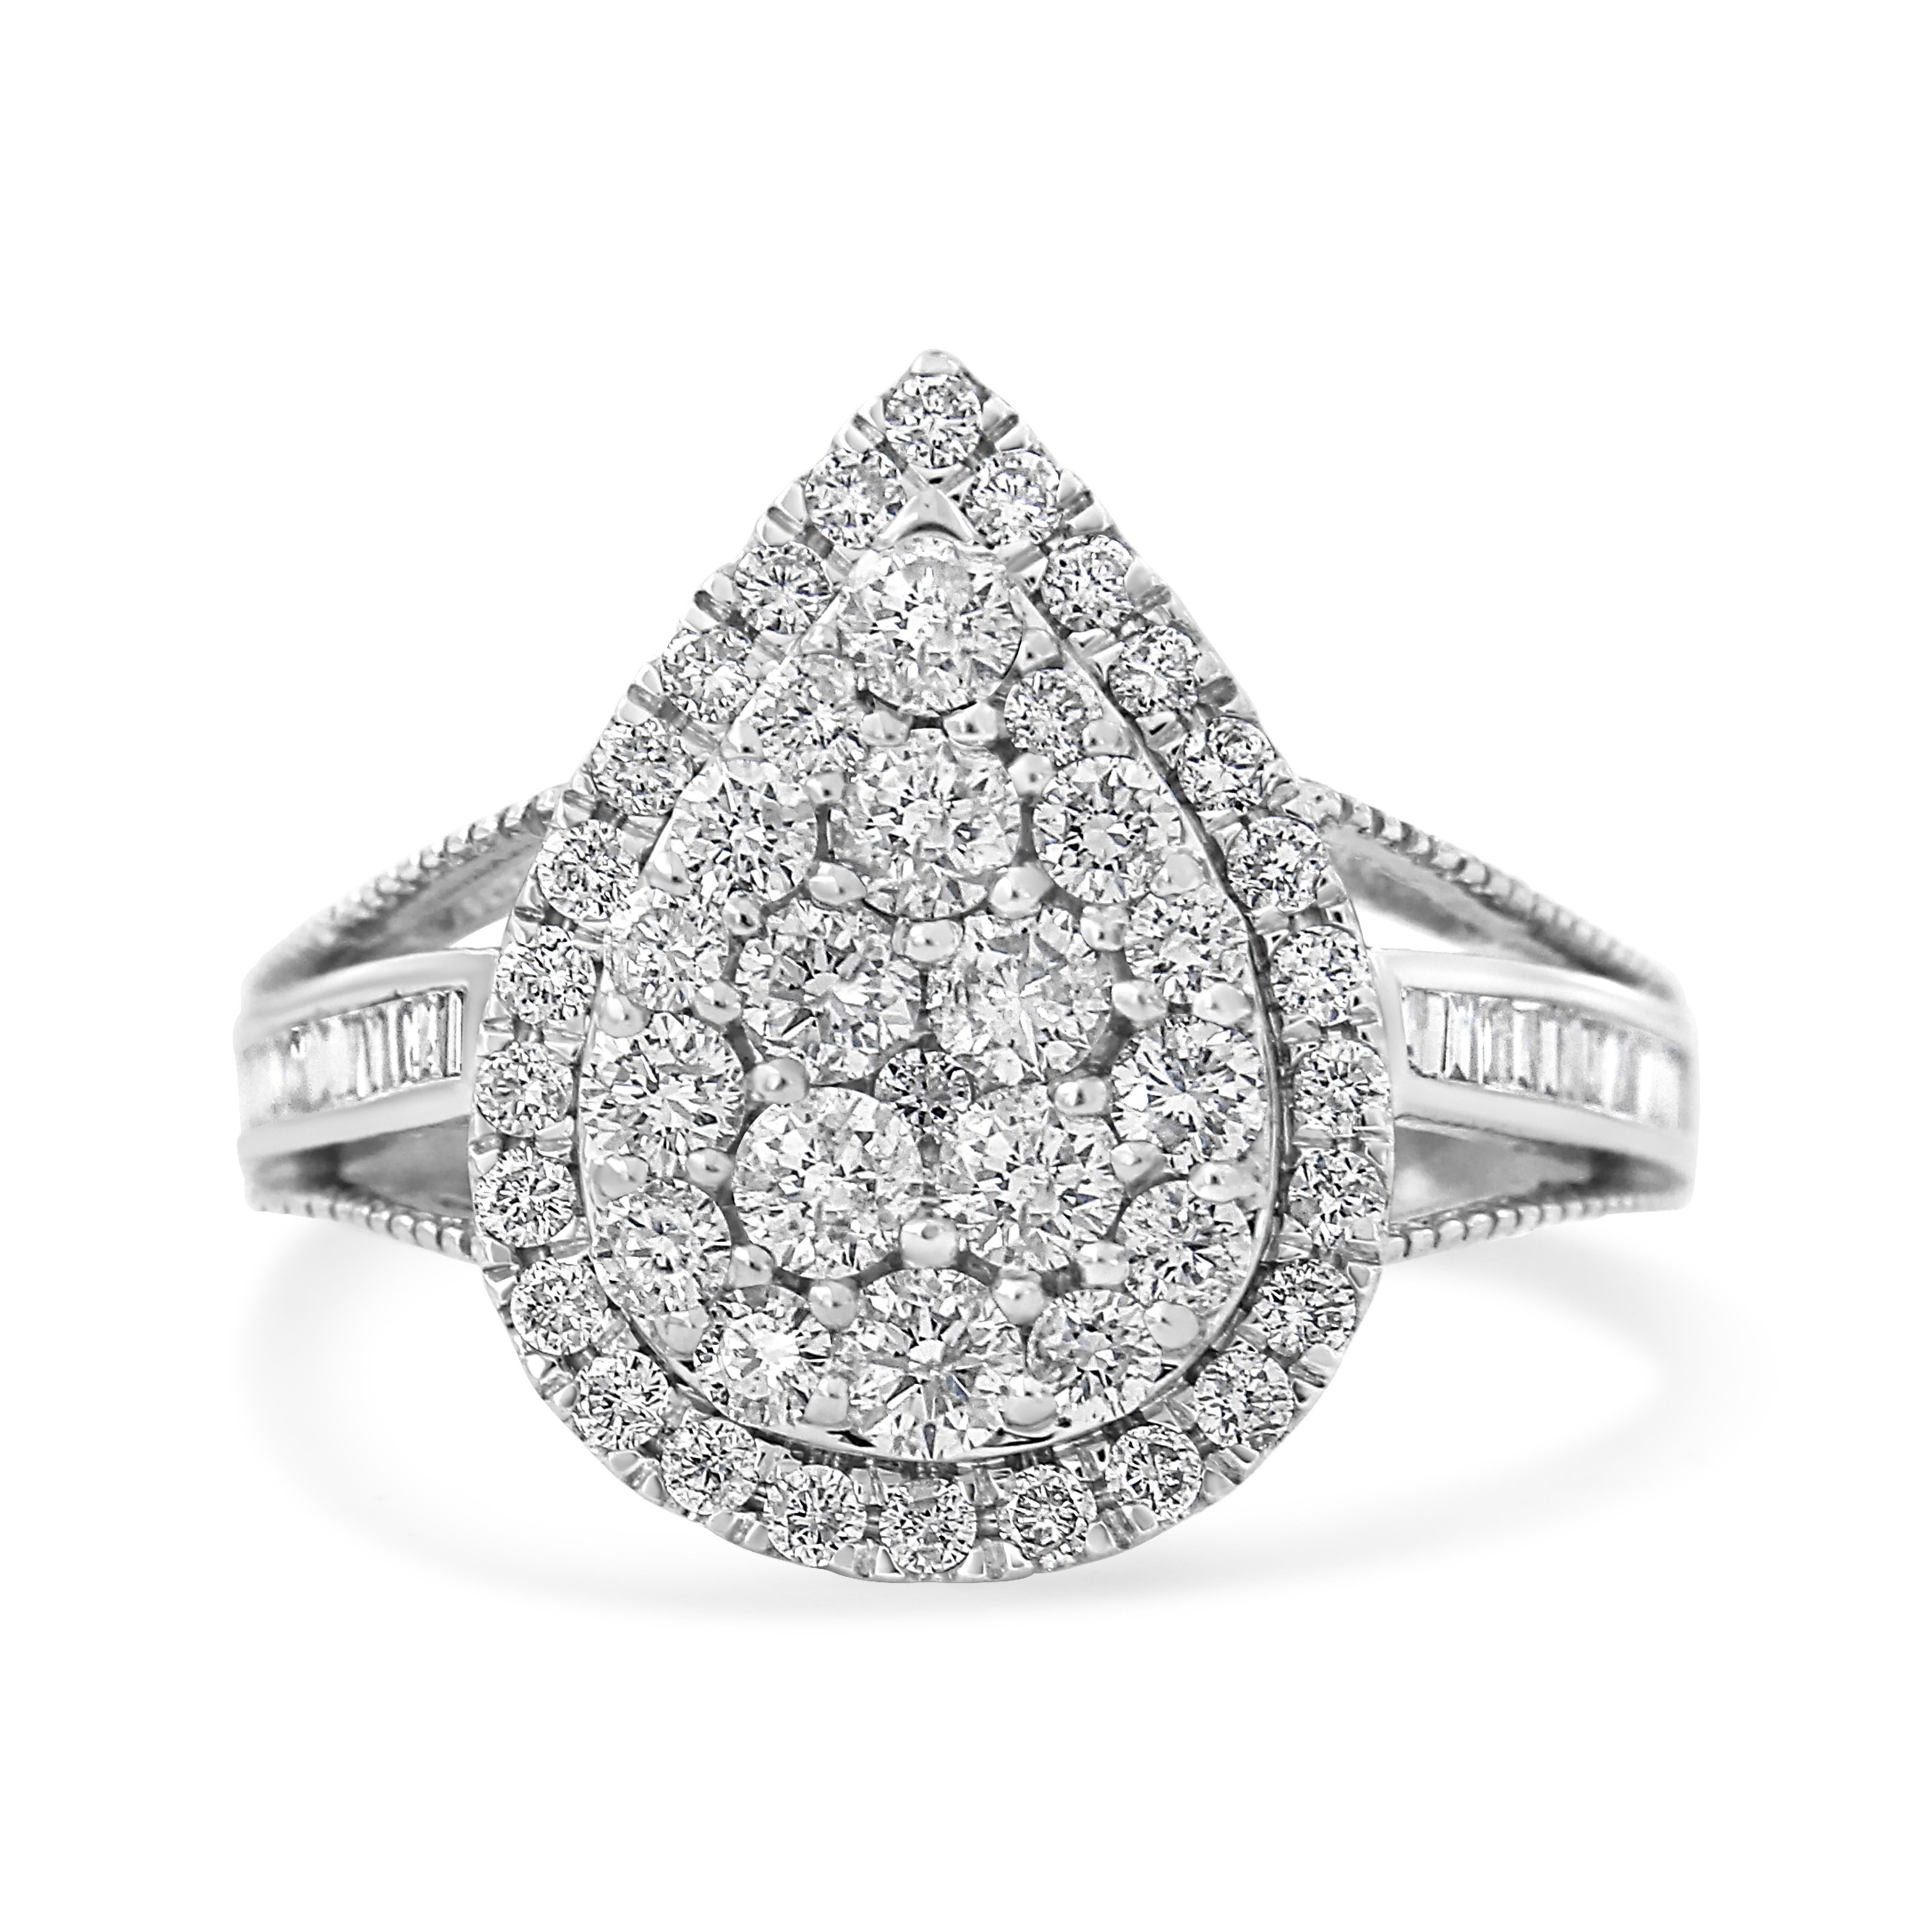 Dazzle and delight her with this stunning diamond cocktail ring. Crafted in cool .925 sterling, this fancy-shape fashion ring showcases a sparkling a stunning total weight of 1 1/2 carat of diamonds wrapped in a pear-shaped frame of round diamonds.